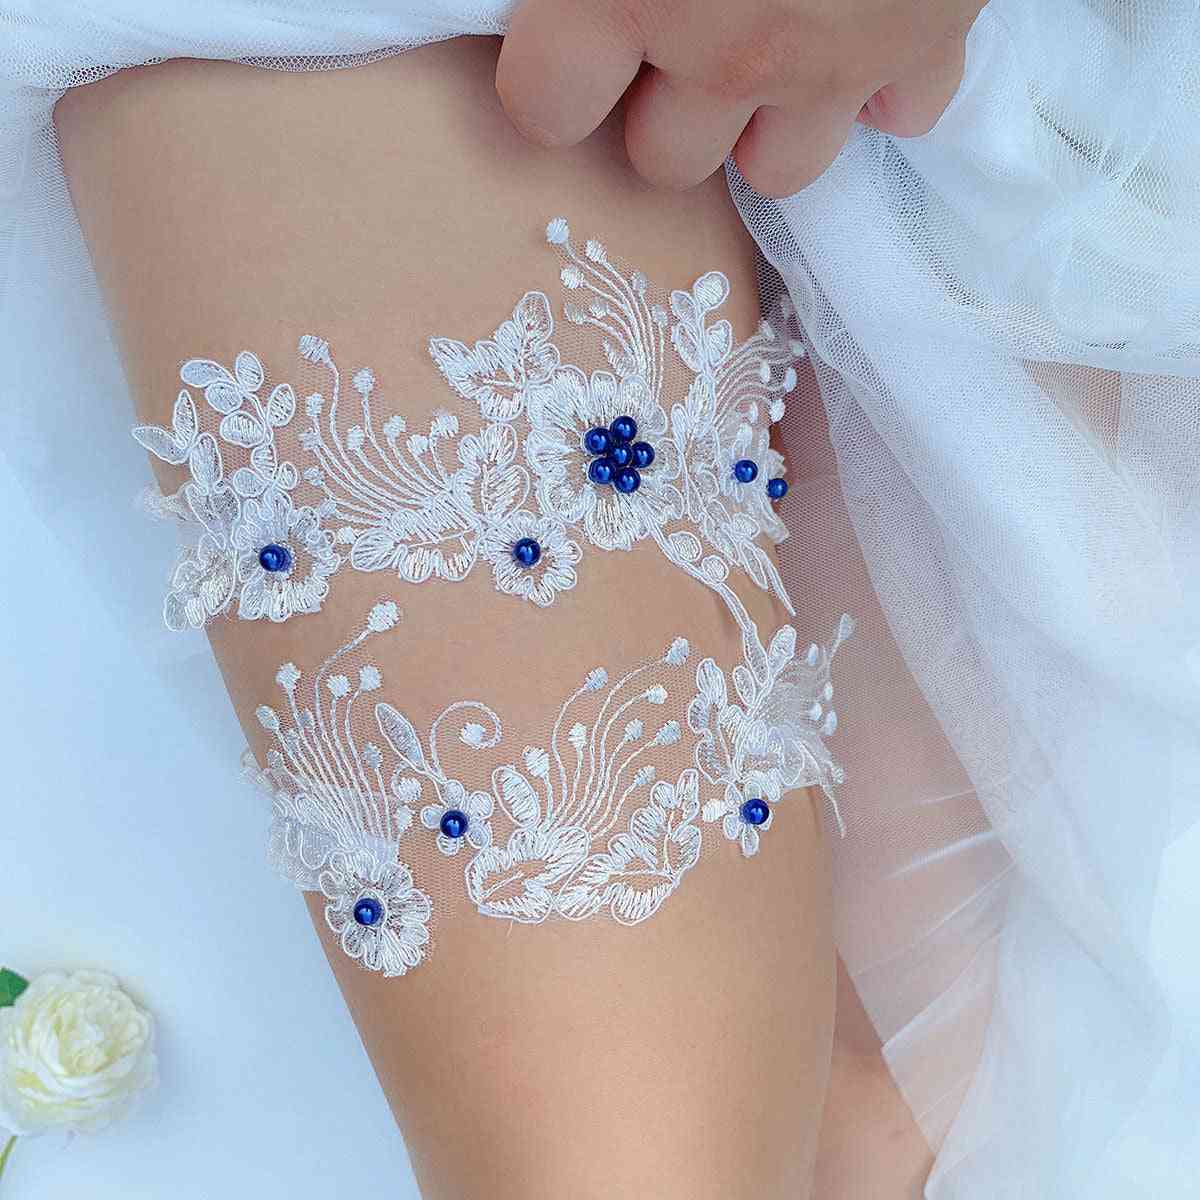 Embroidery Floral, Thigh Ring, Leg Garter Lace For Bridal